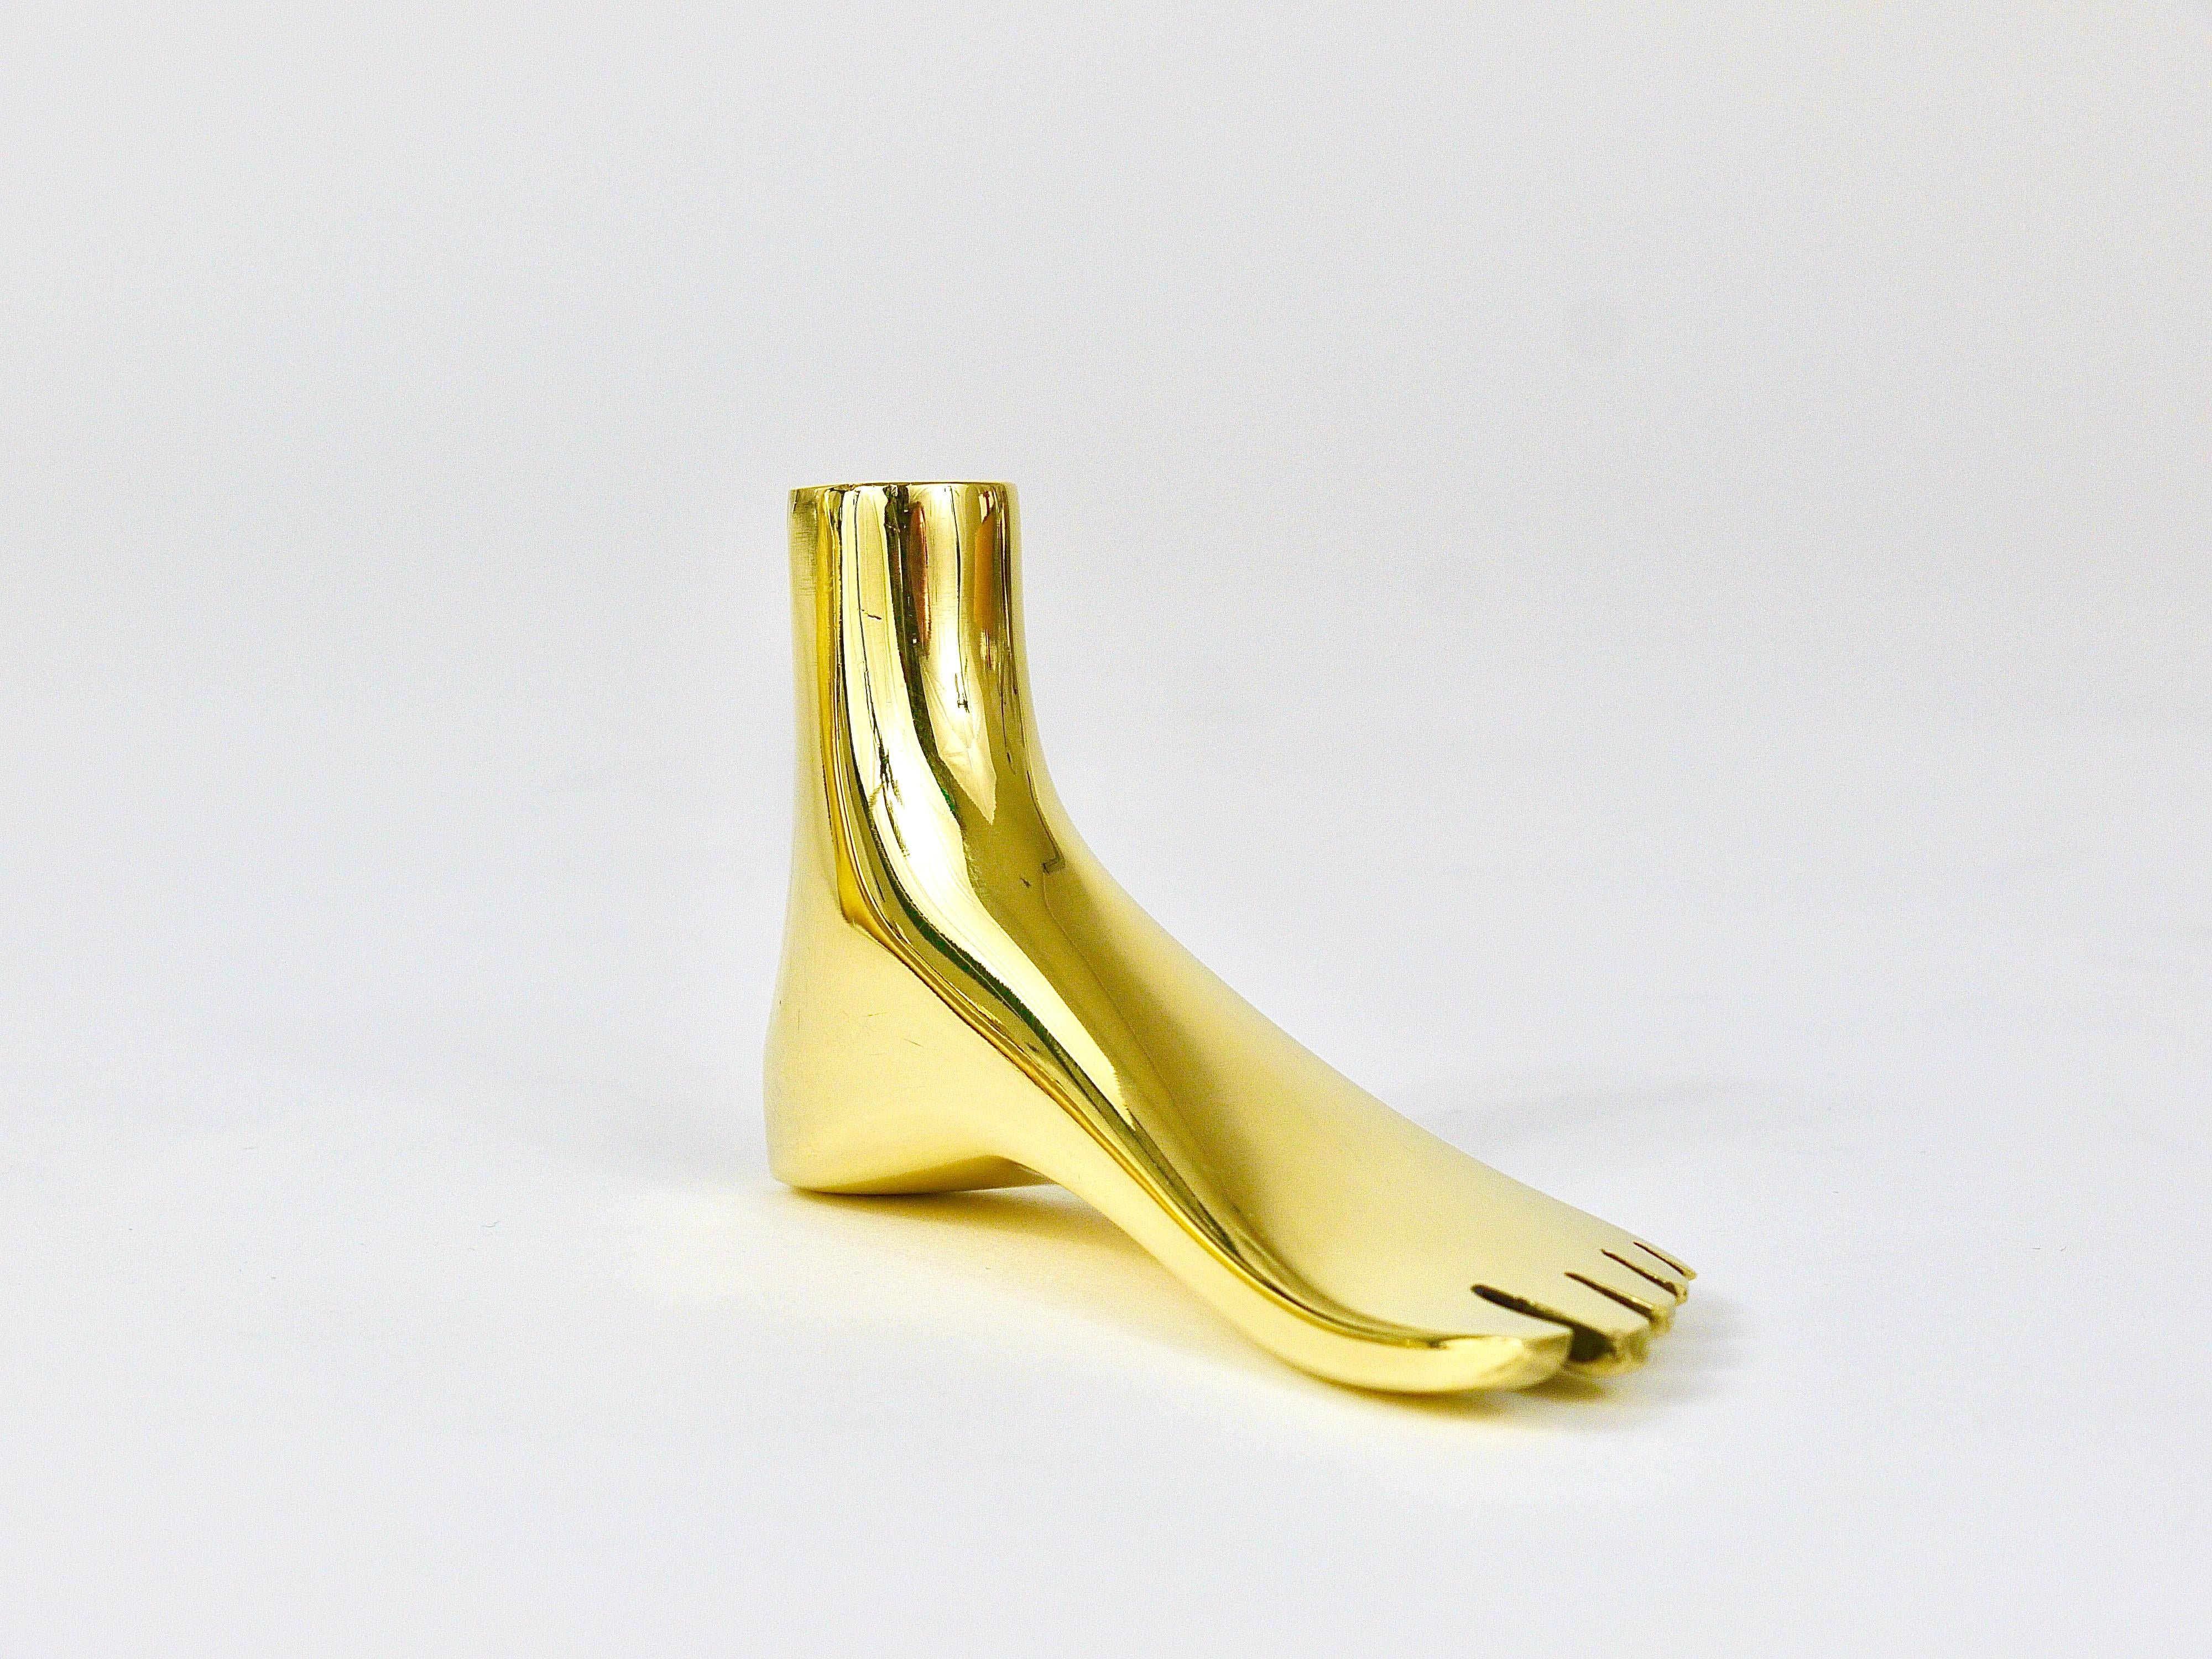 Signed Carl Auböck Midcentury Brass Foot Paperweight Handmade Sculpture For Sale 6